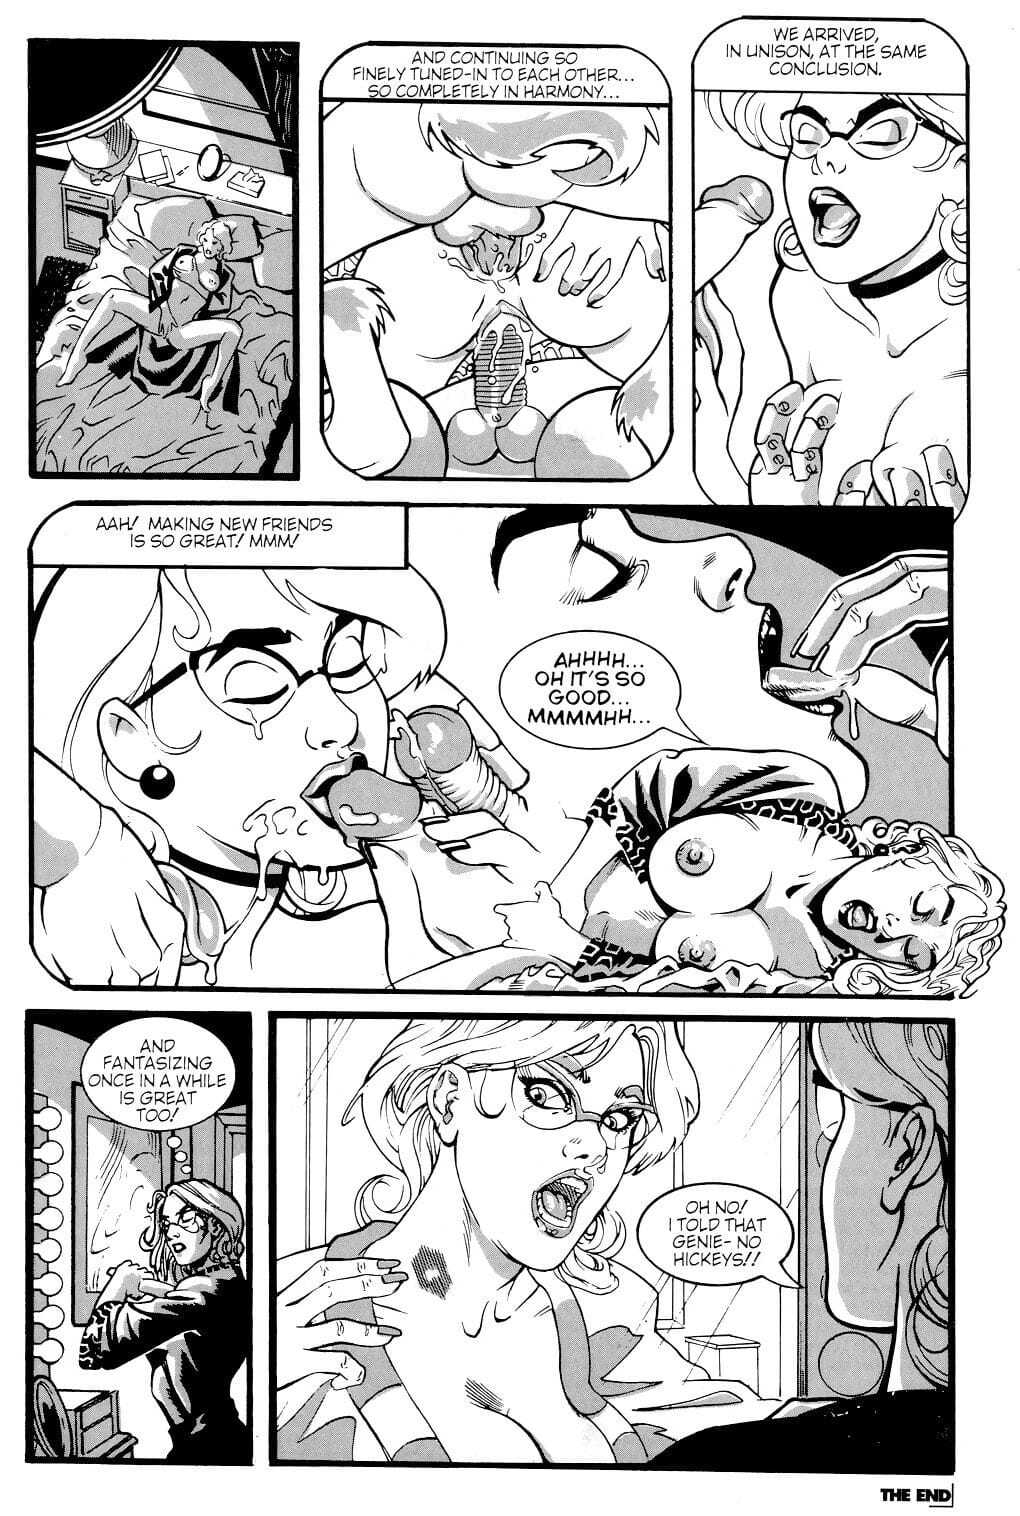 French Kiss 3 page 1